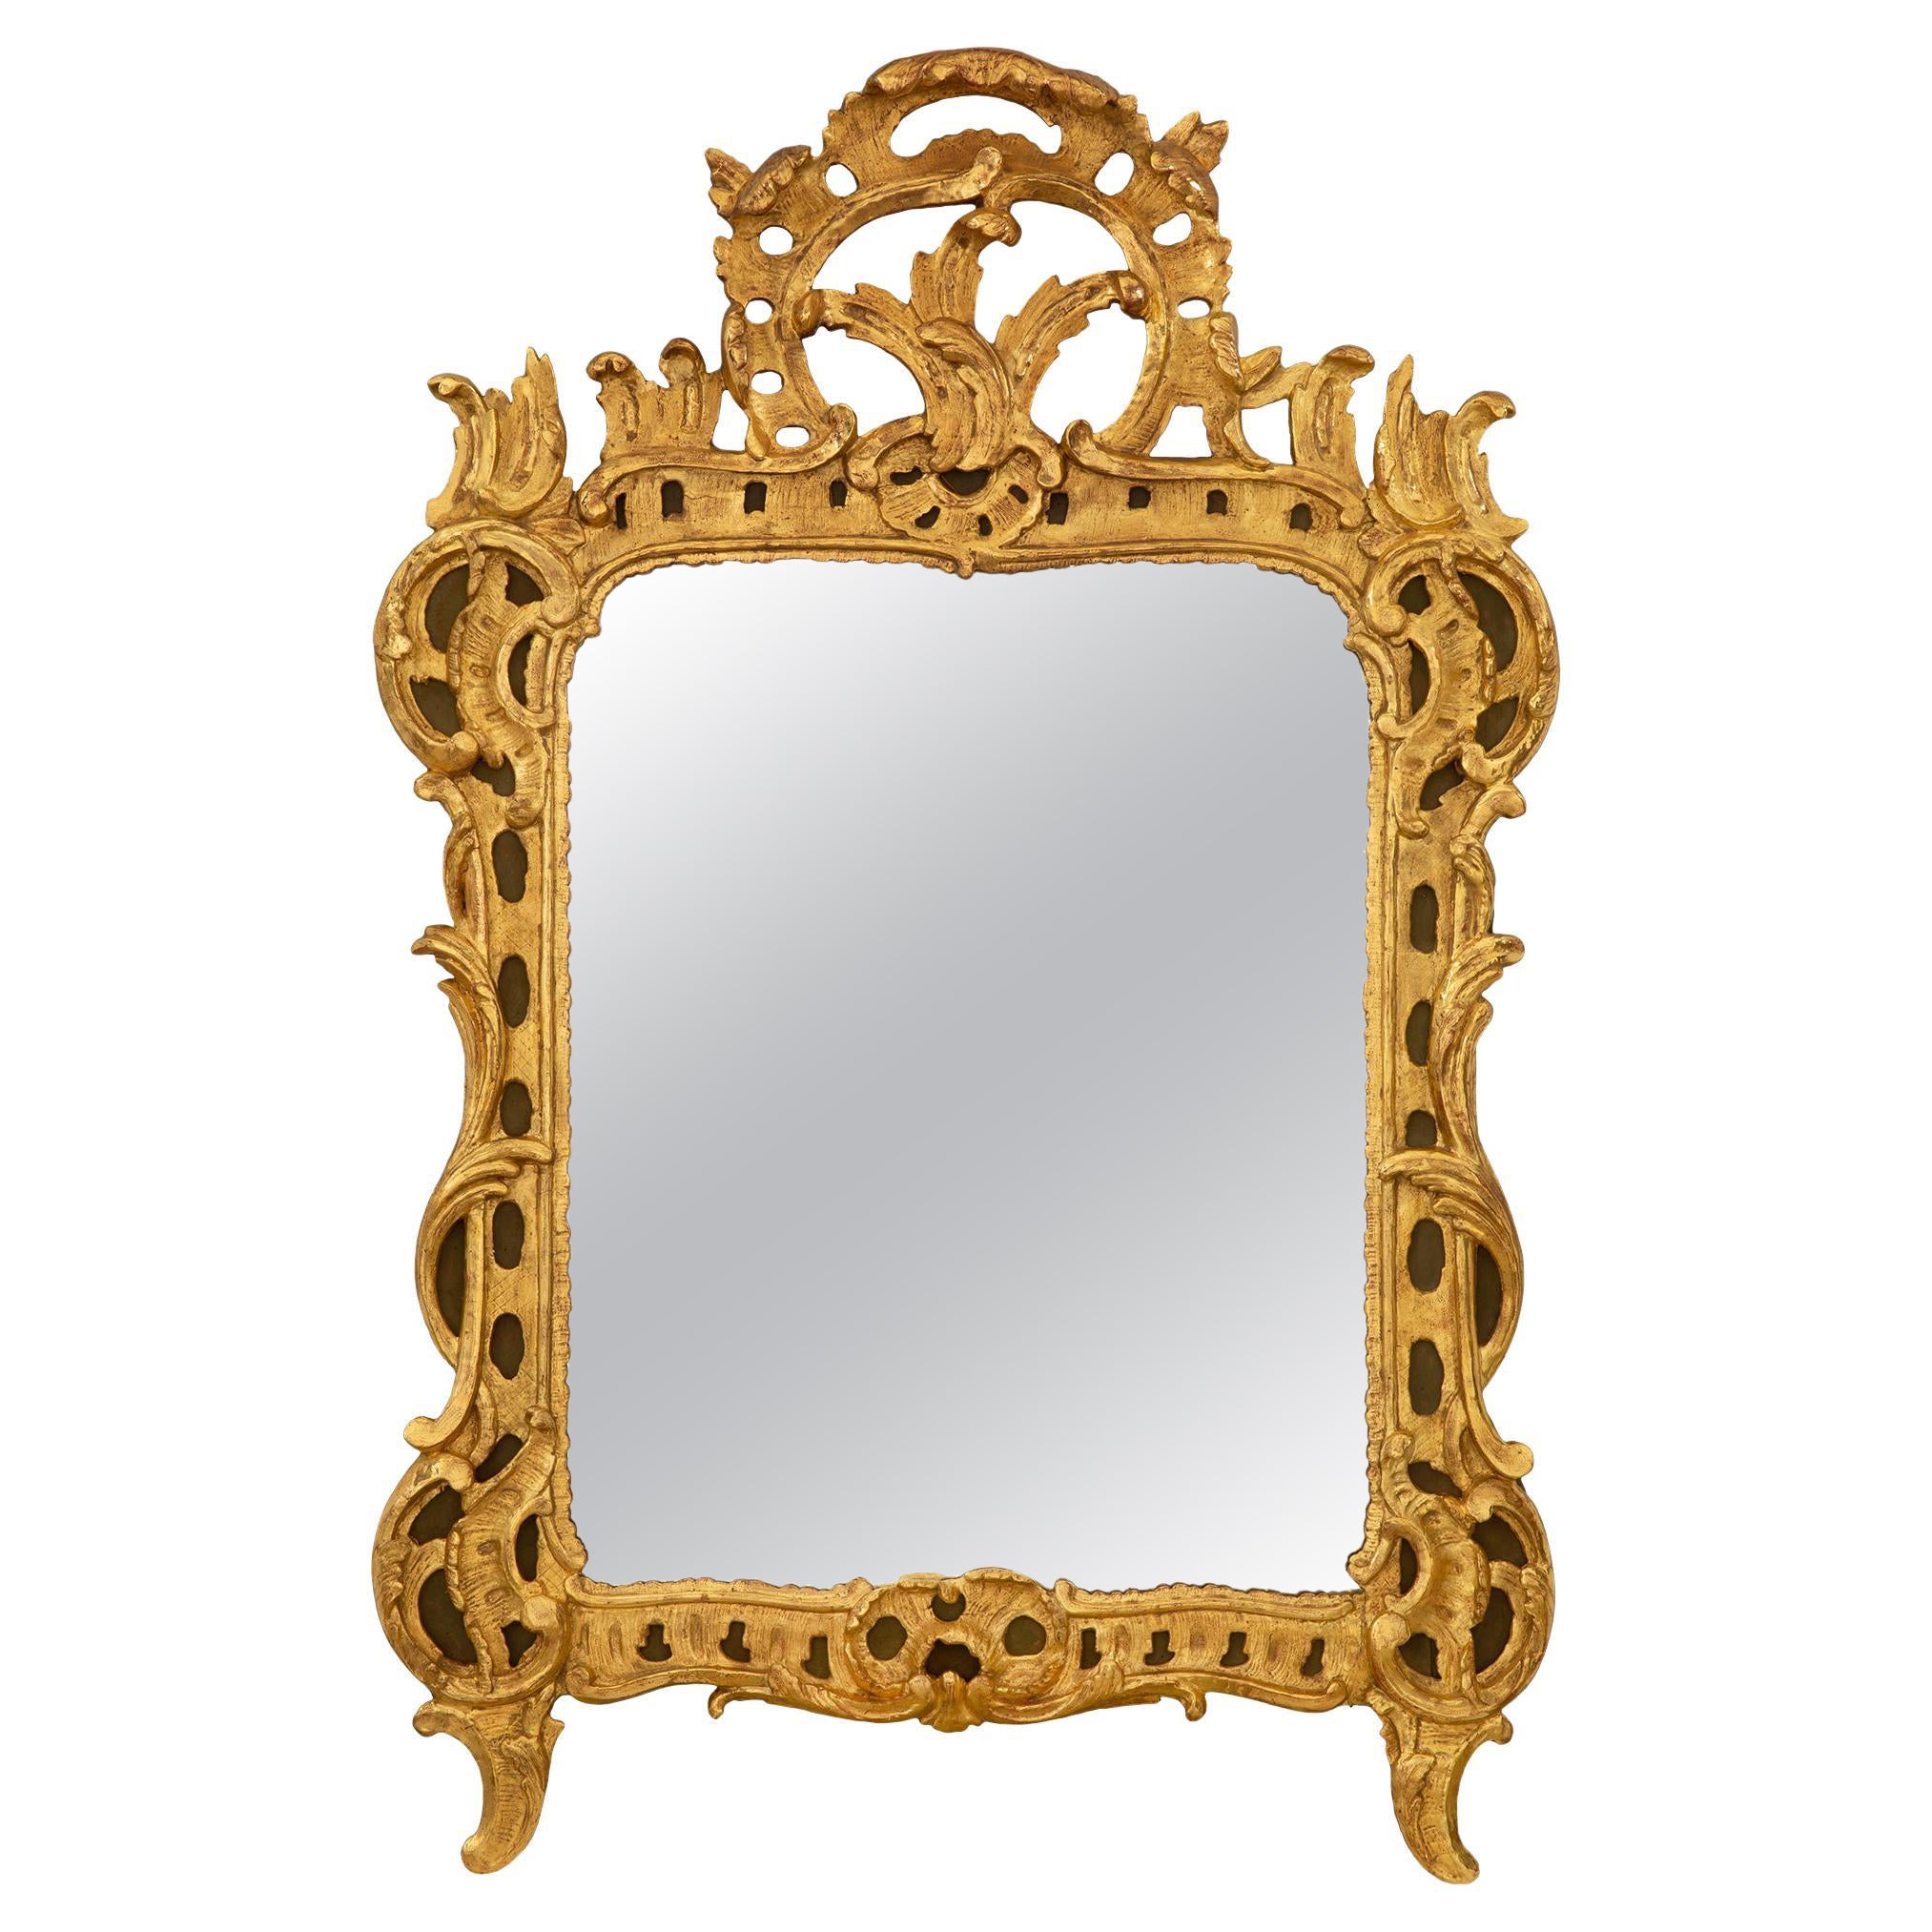 French 18th Century Régence Period Giltwood Mirror